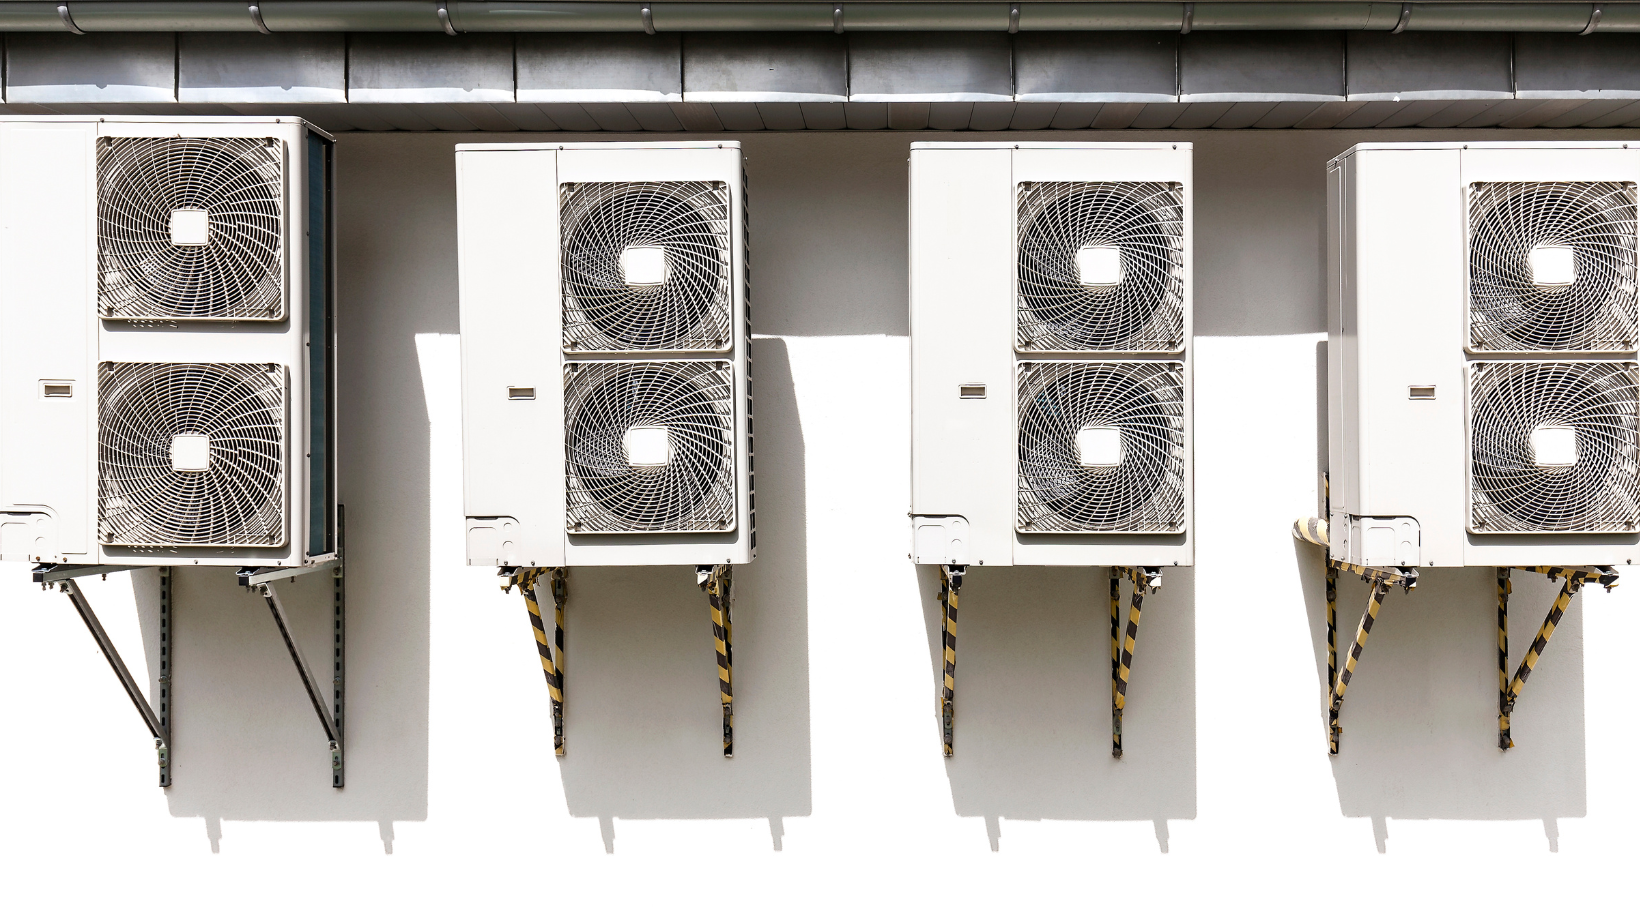 Factors to consider when choosing an AC system for a commercial building